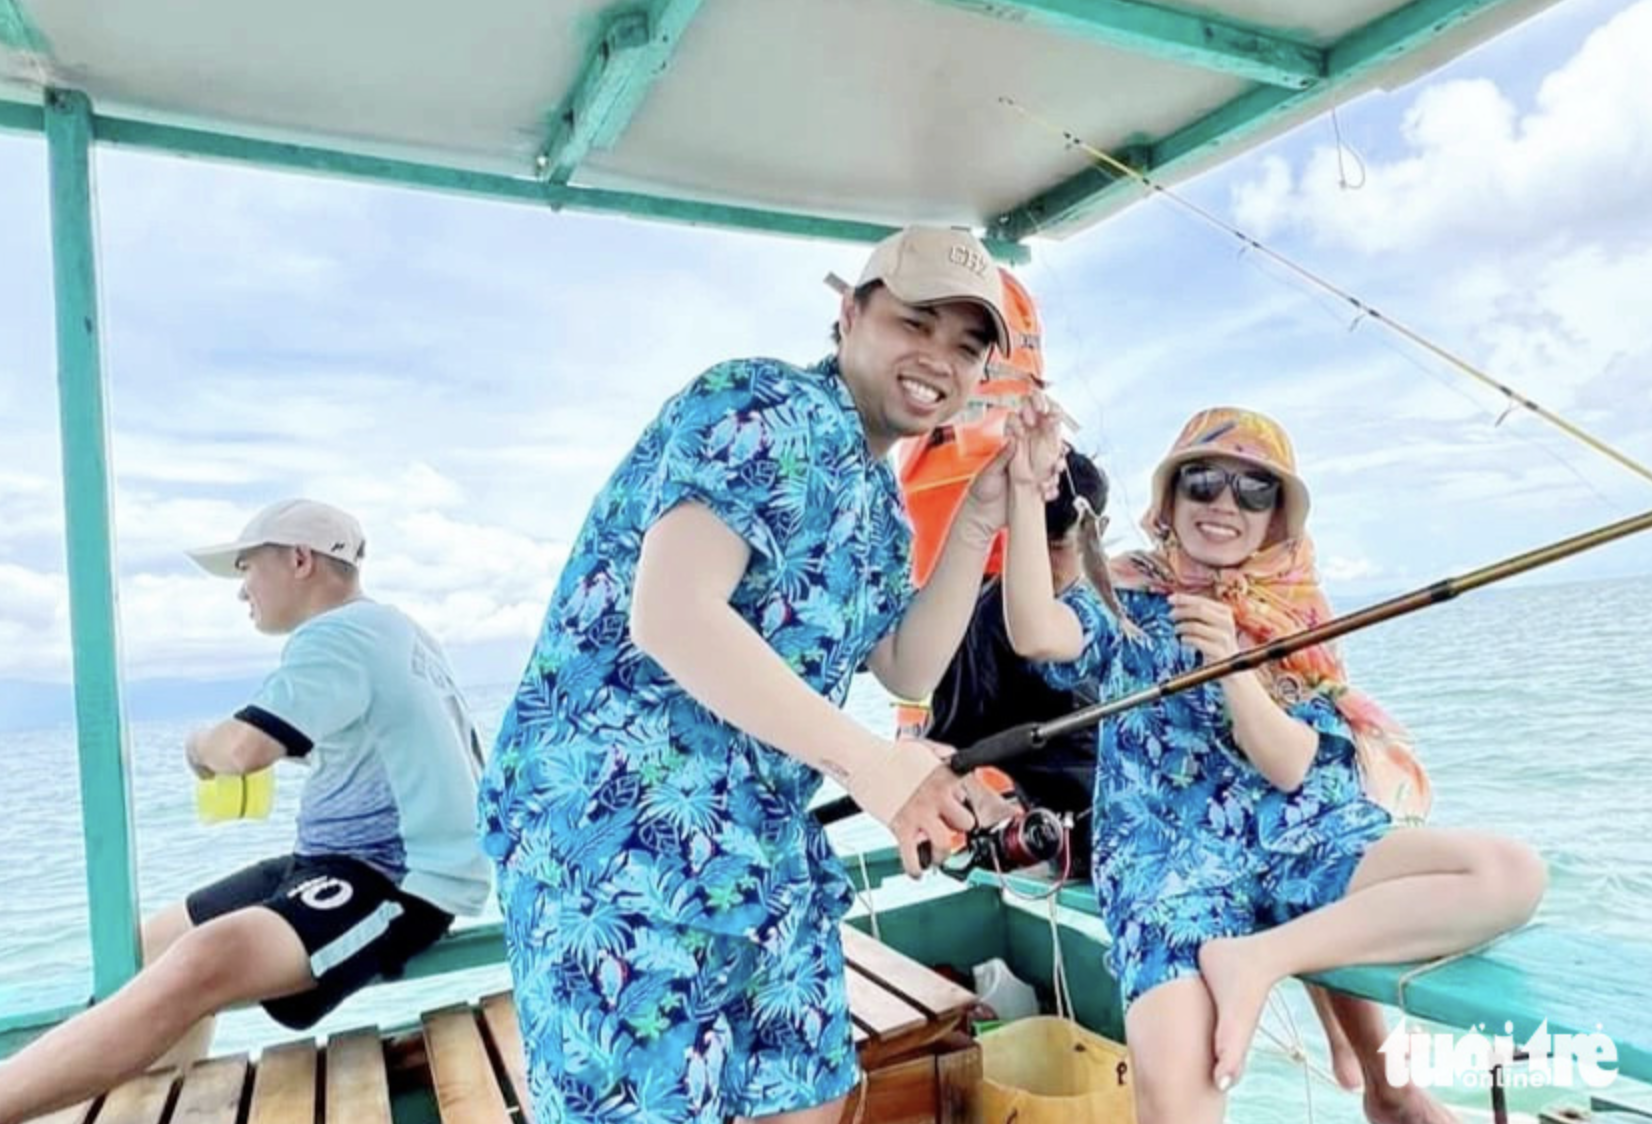 Visitors are exhilarated with fishing on Phu Quoc Island. Photo: Chi Cong / Tuoi Tre